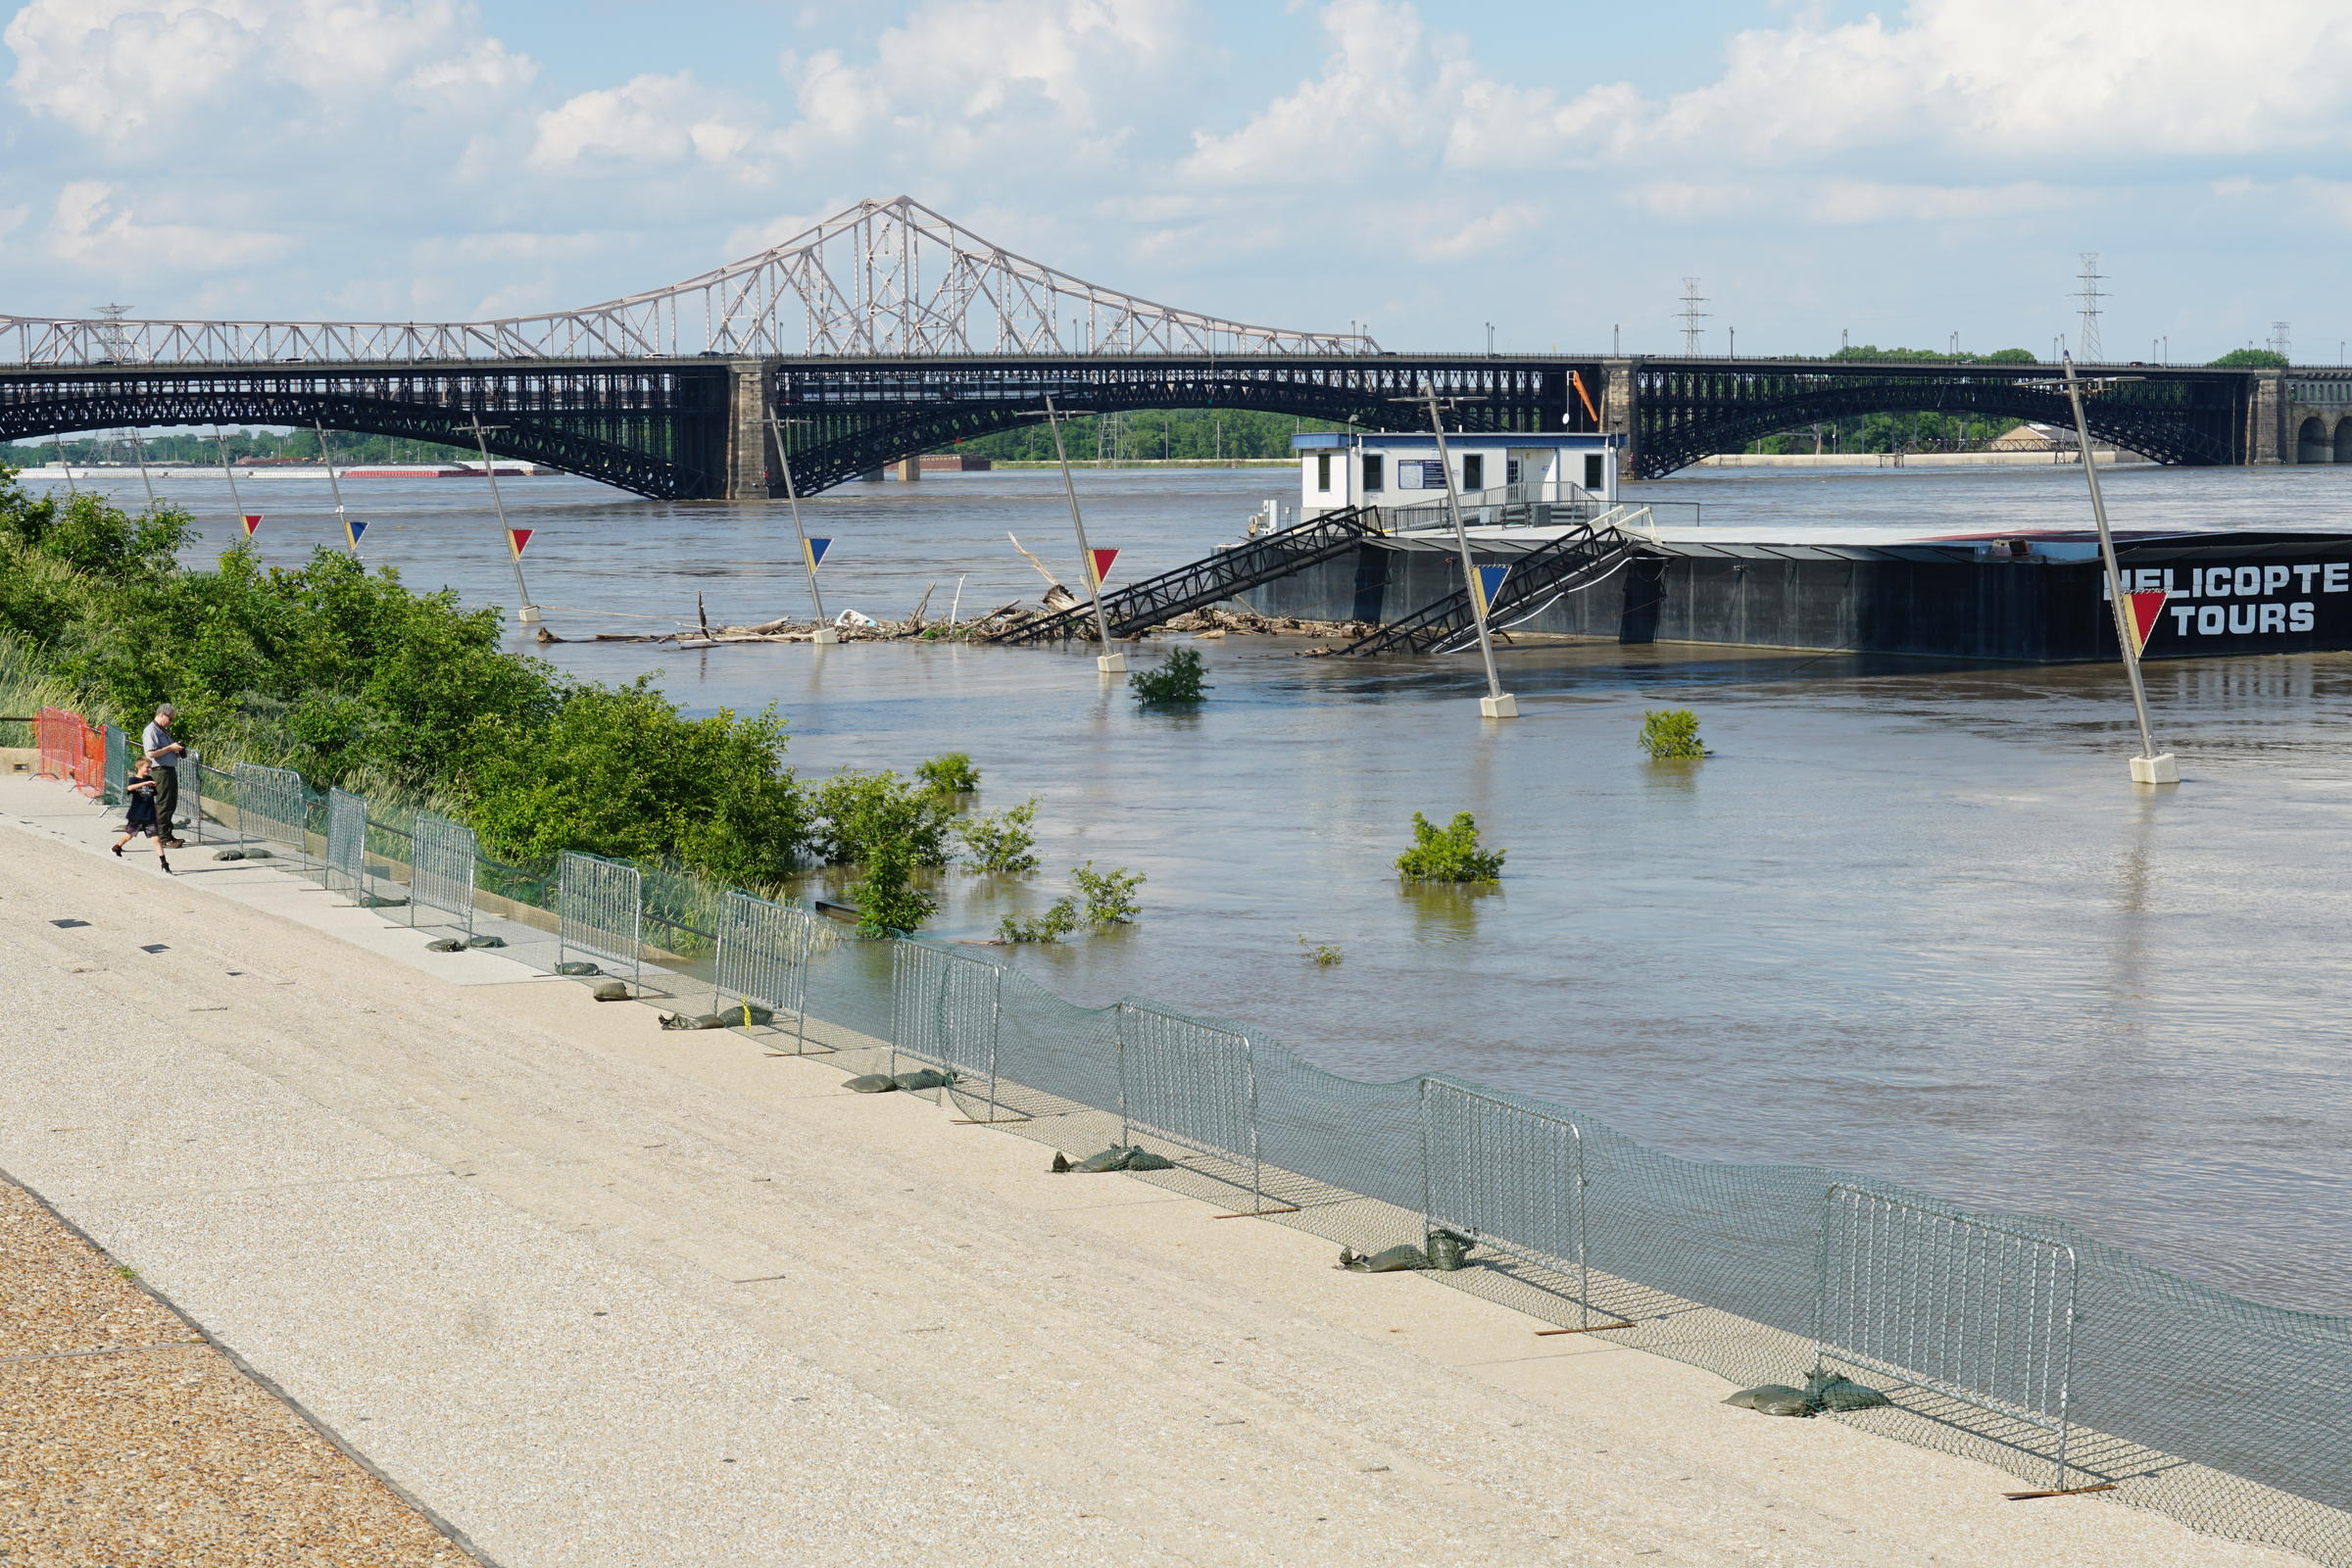 Mississippi River Crested, But The Waters Remain High For Now | St. Louis Public Radio